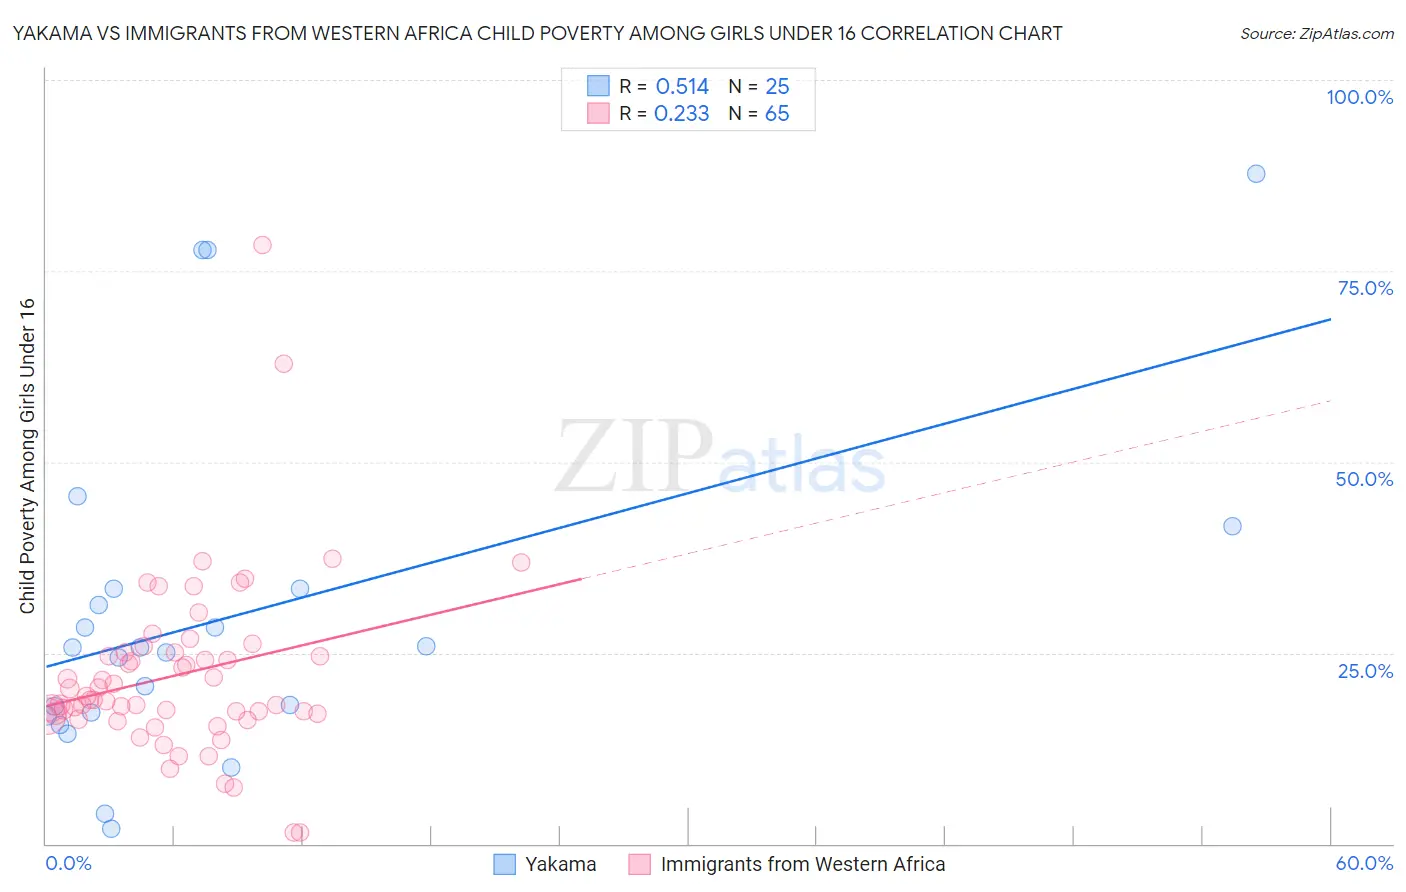 Yakama vs Immigrants from Western Africa Child Poverty Among Girls Under 16